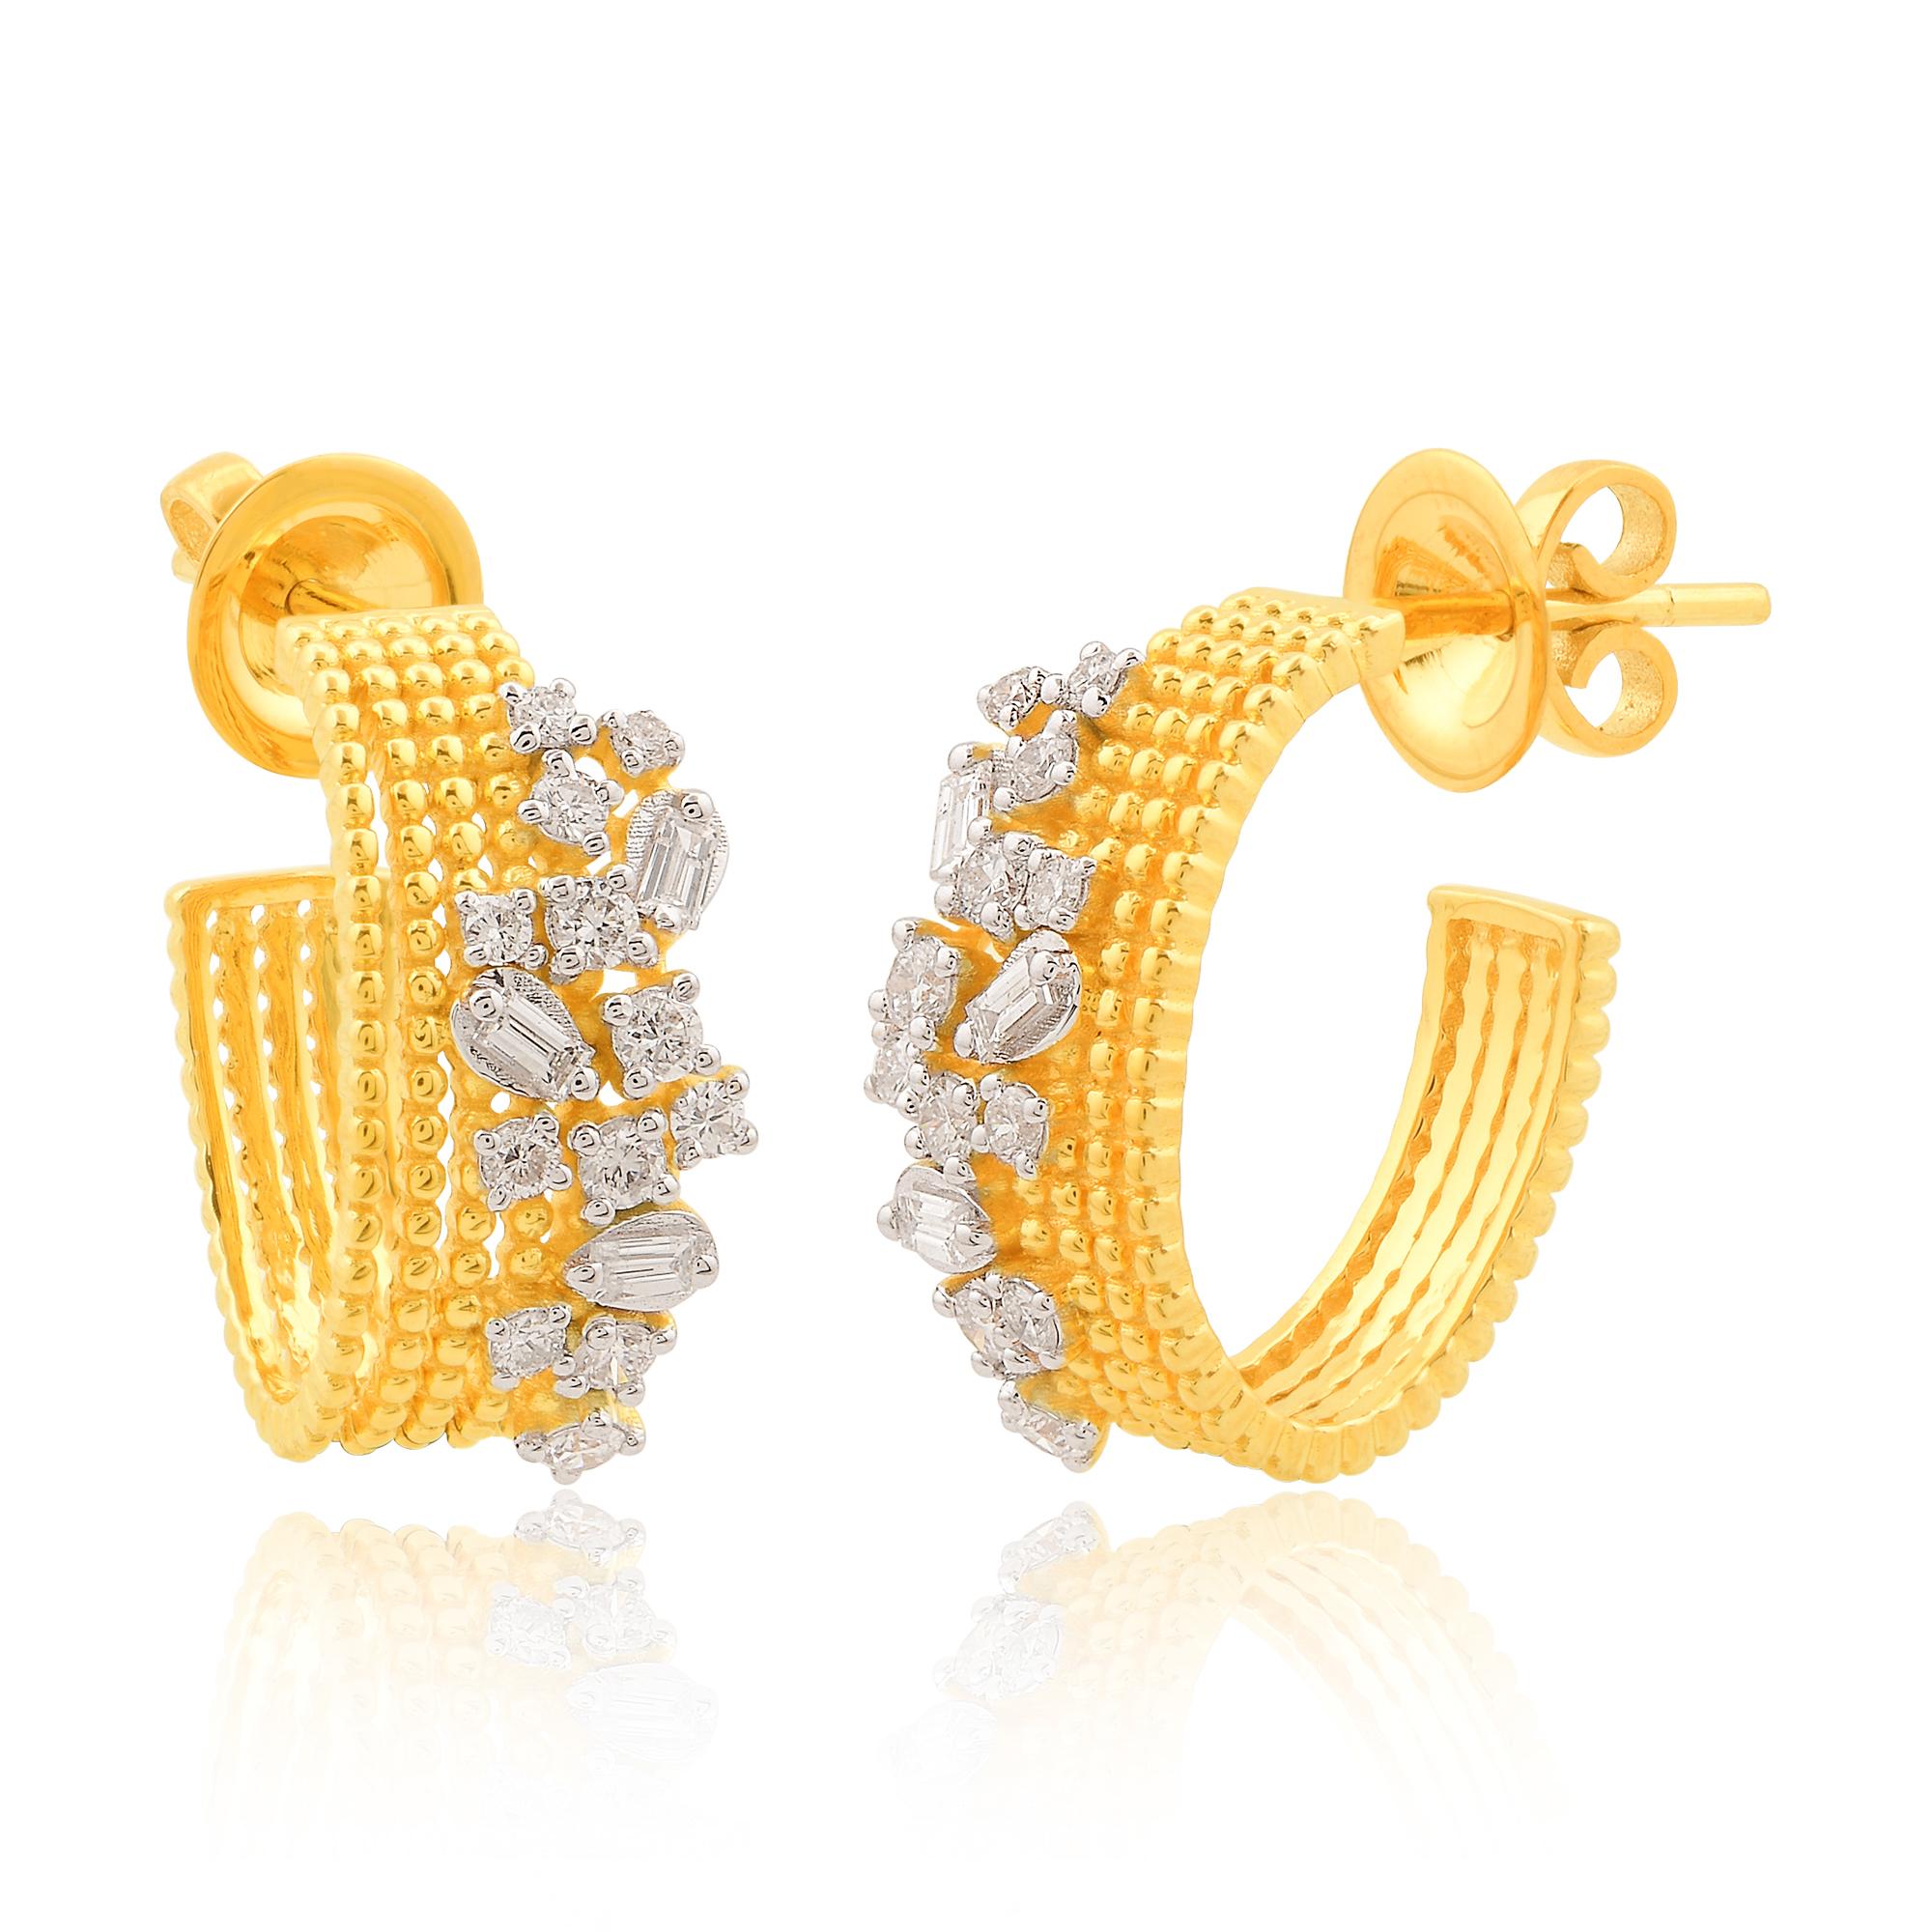 Item Code :- SEE-1117B (14k)
Gross Weight :- 5.26 gm
14k Solid Yellow Gold Weight :- 5.13 gm
Natural Diamond Weight :- 0.65 carat  ( AVERAGE DIAMOND CLARITY SI1-SI2 & COLOR H-I )
Earrings Size :- 8 x 19 mm approx.

✦ Sizing
.....................
We